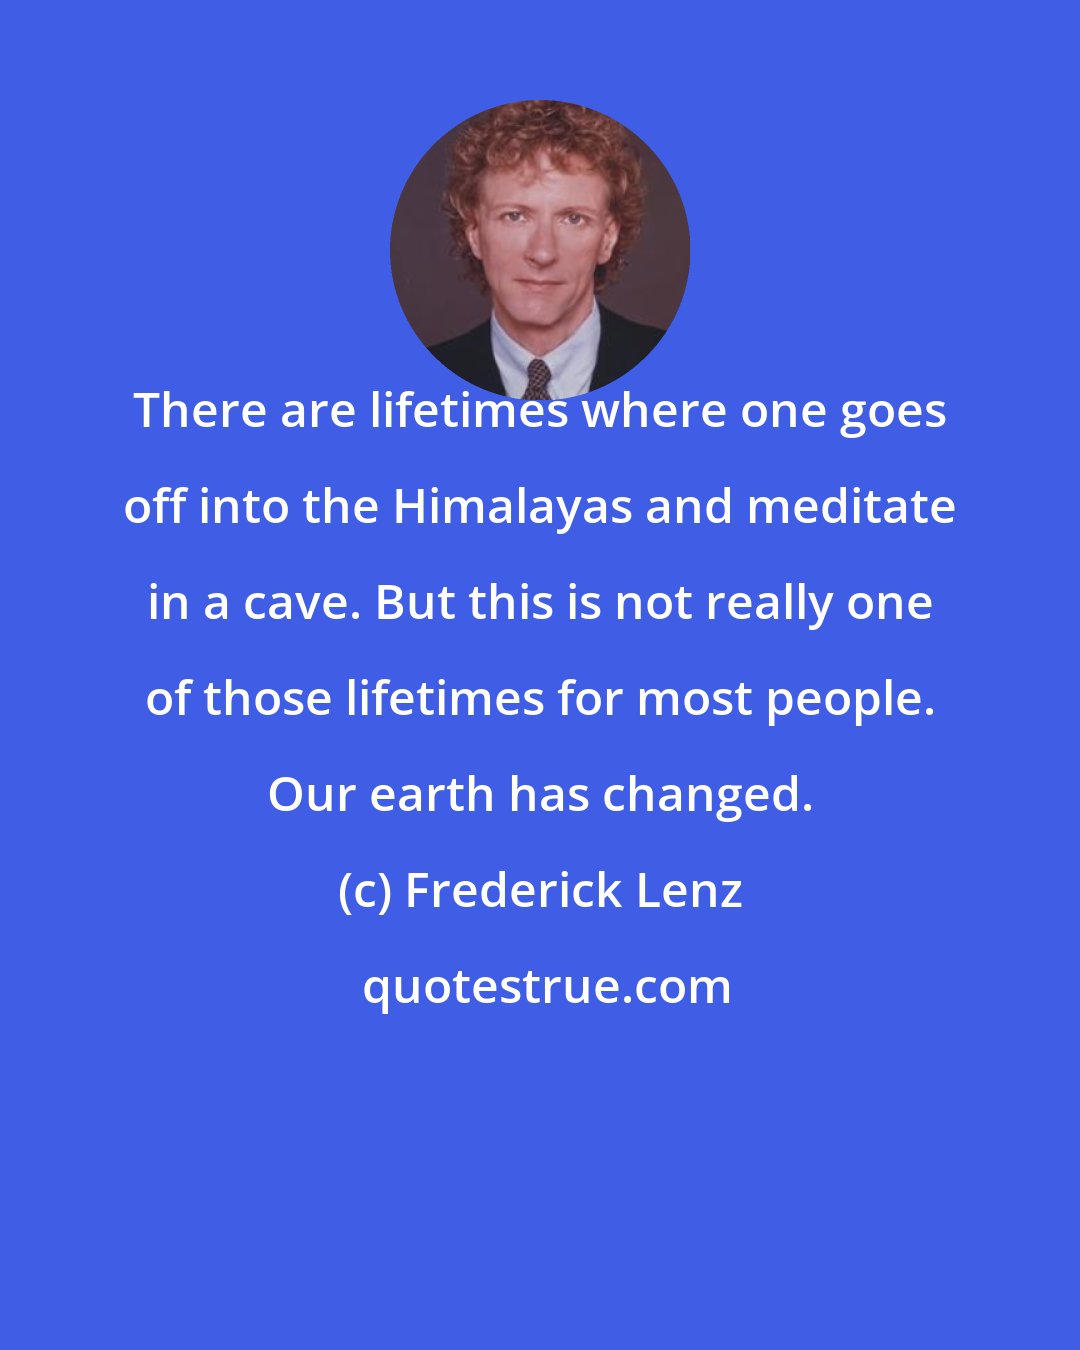 Frederick Lenz: There are lifetimes where one goes off into the Himalayas and meditate in a cave. But this is not really one of those lifetimes for most people. Our earth has changed.